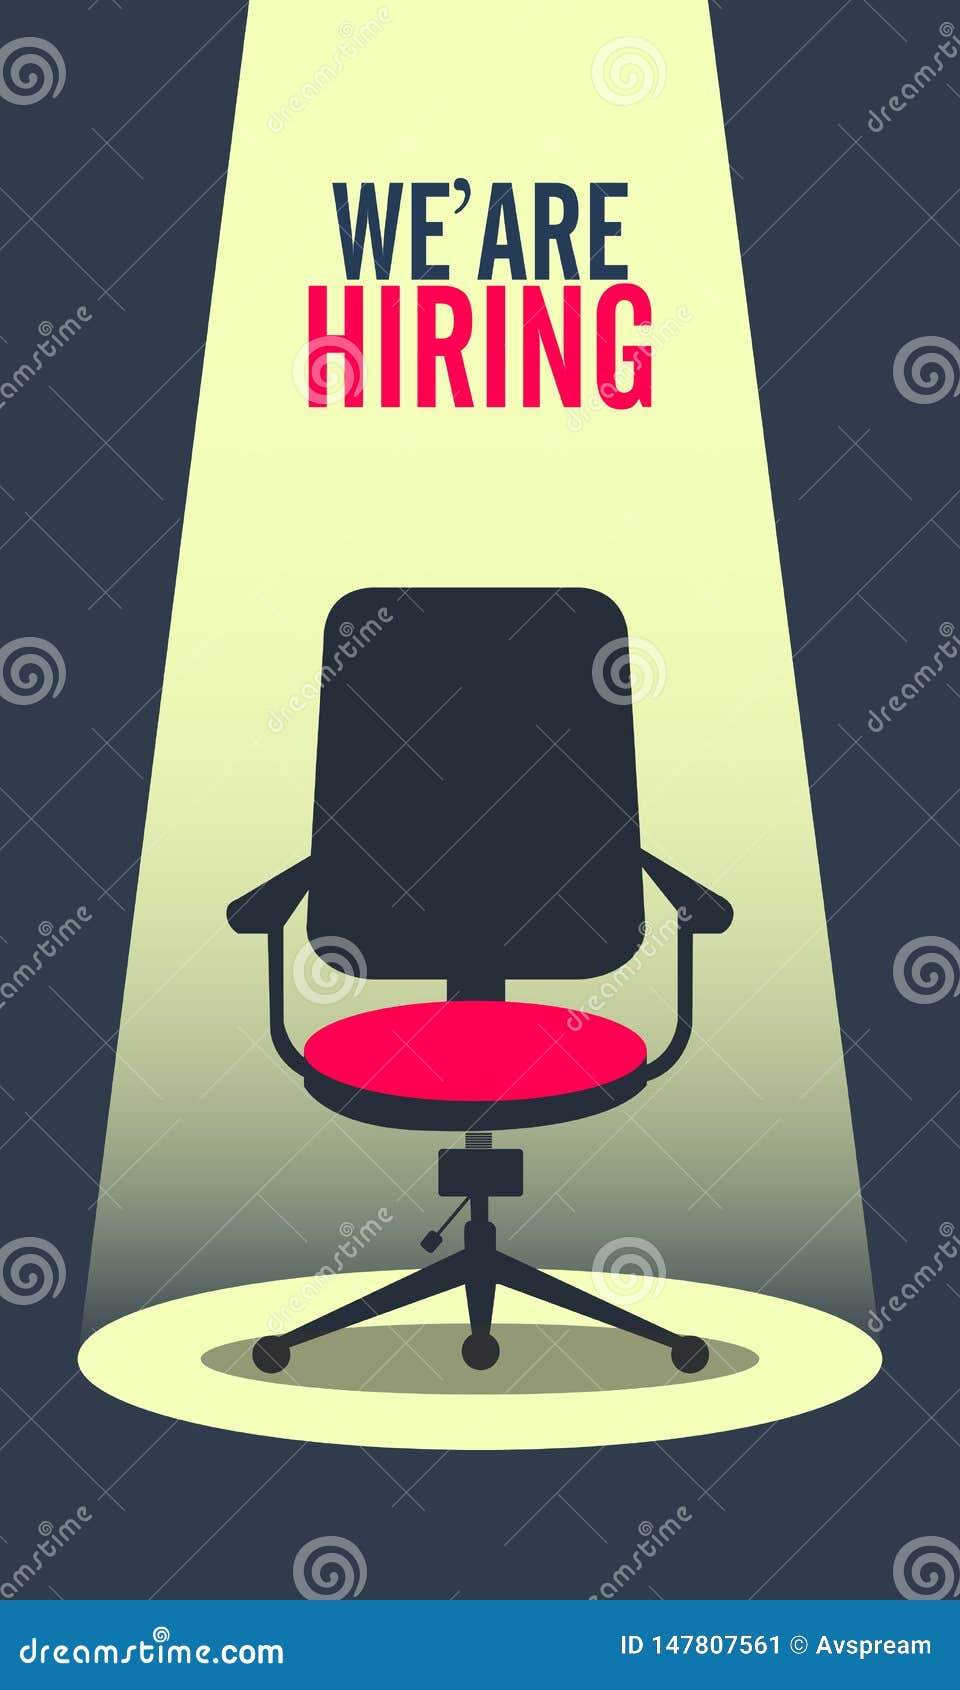 We Are Hiring Join Our Team Poster Design With Position Contact Information  On Yellow Rays Background Stock Illustration  Download Image Now  iStock